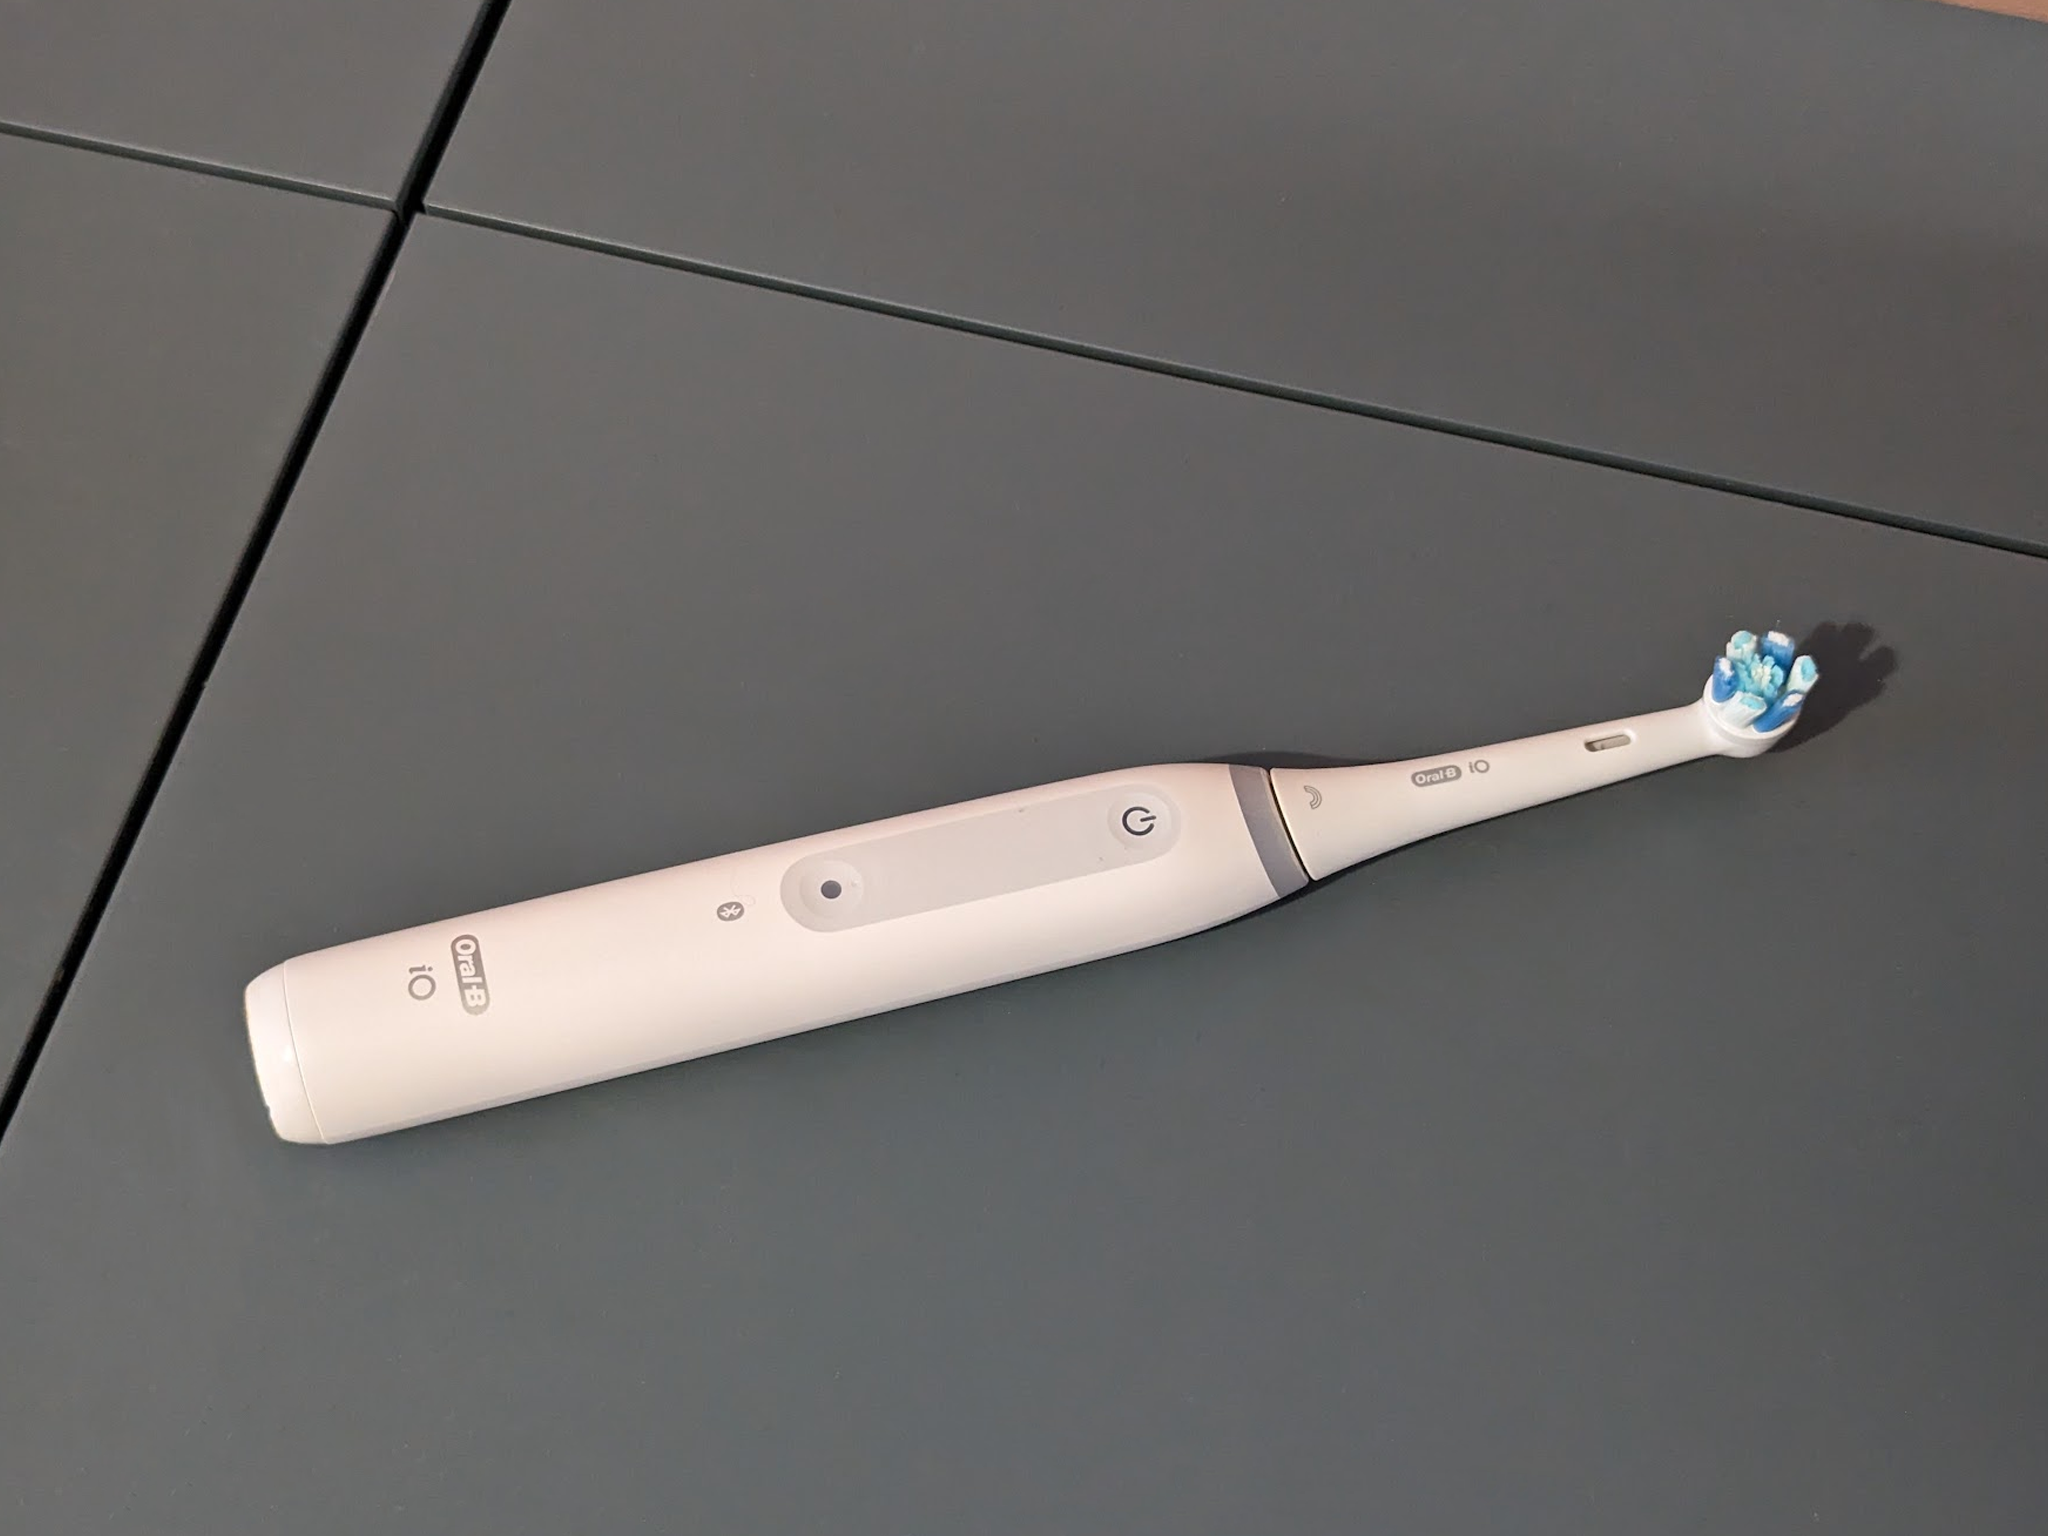 Oral-B Spent Six Years Researching Its Newest Toothbrush. It Was Worth It